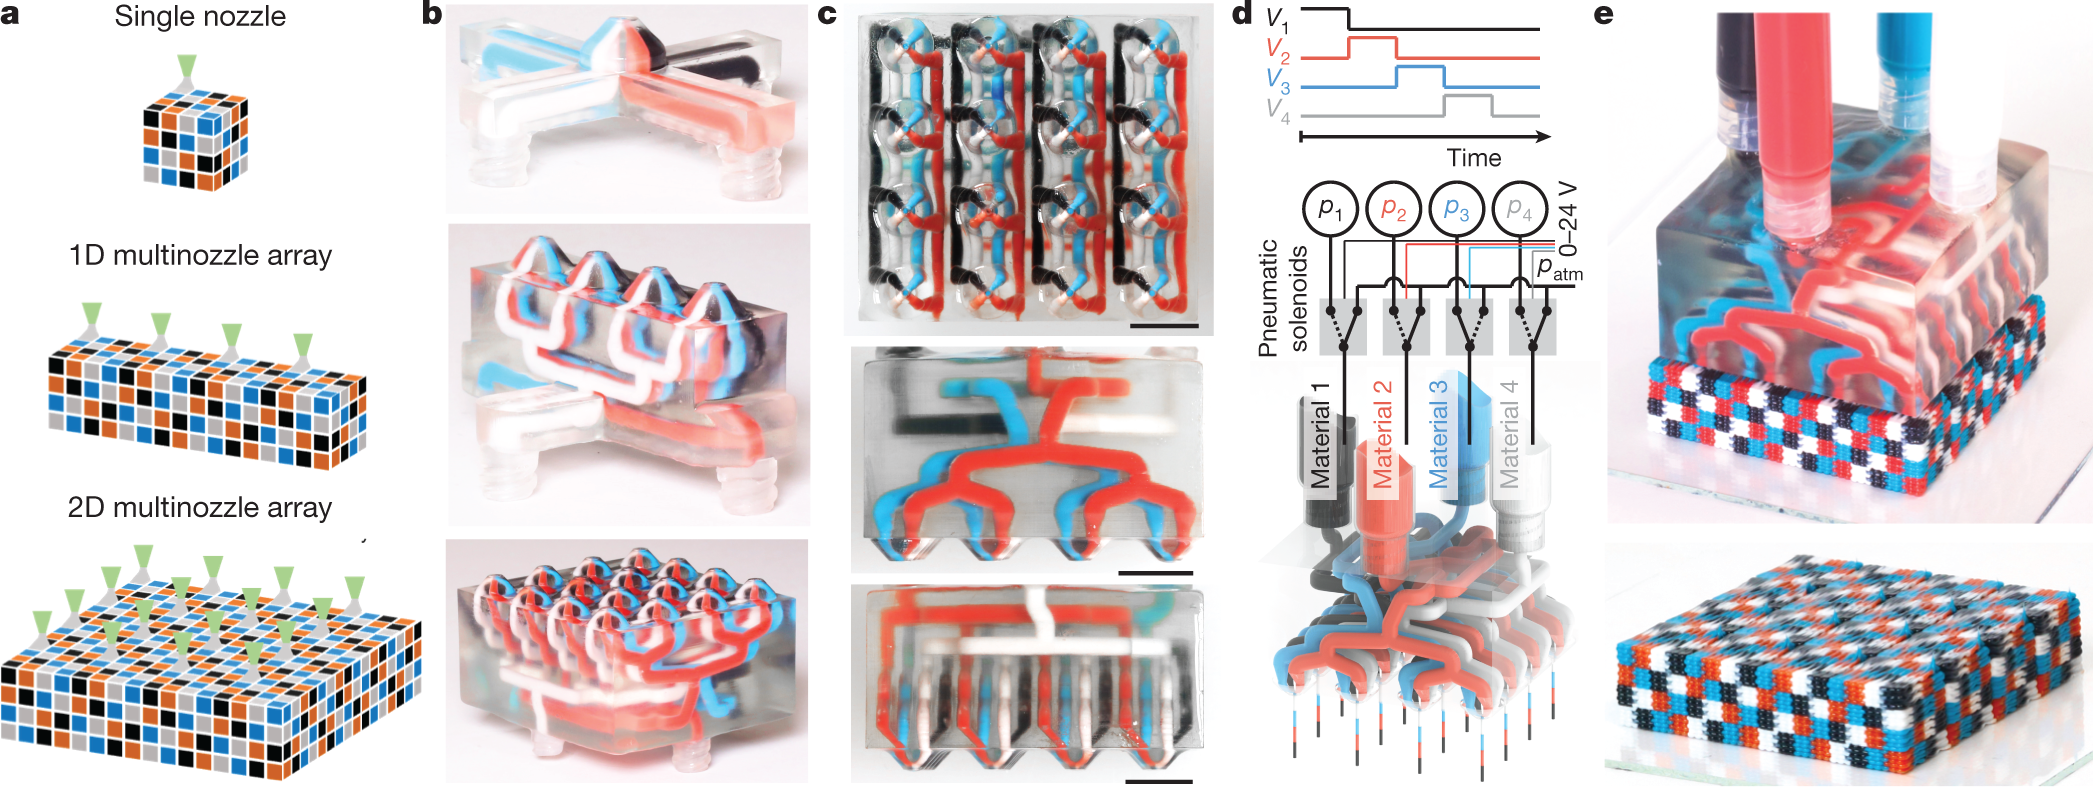 social Stolpe mobil Voxelated soft matter via multimaterial multinozzle 3D printing | Nature